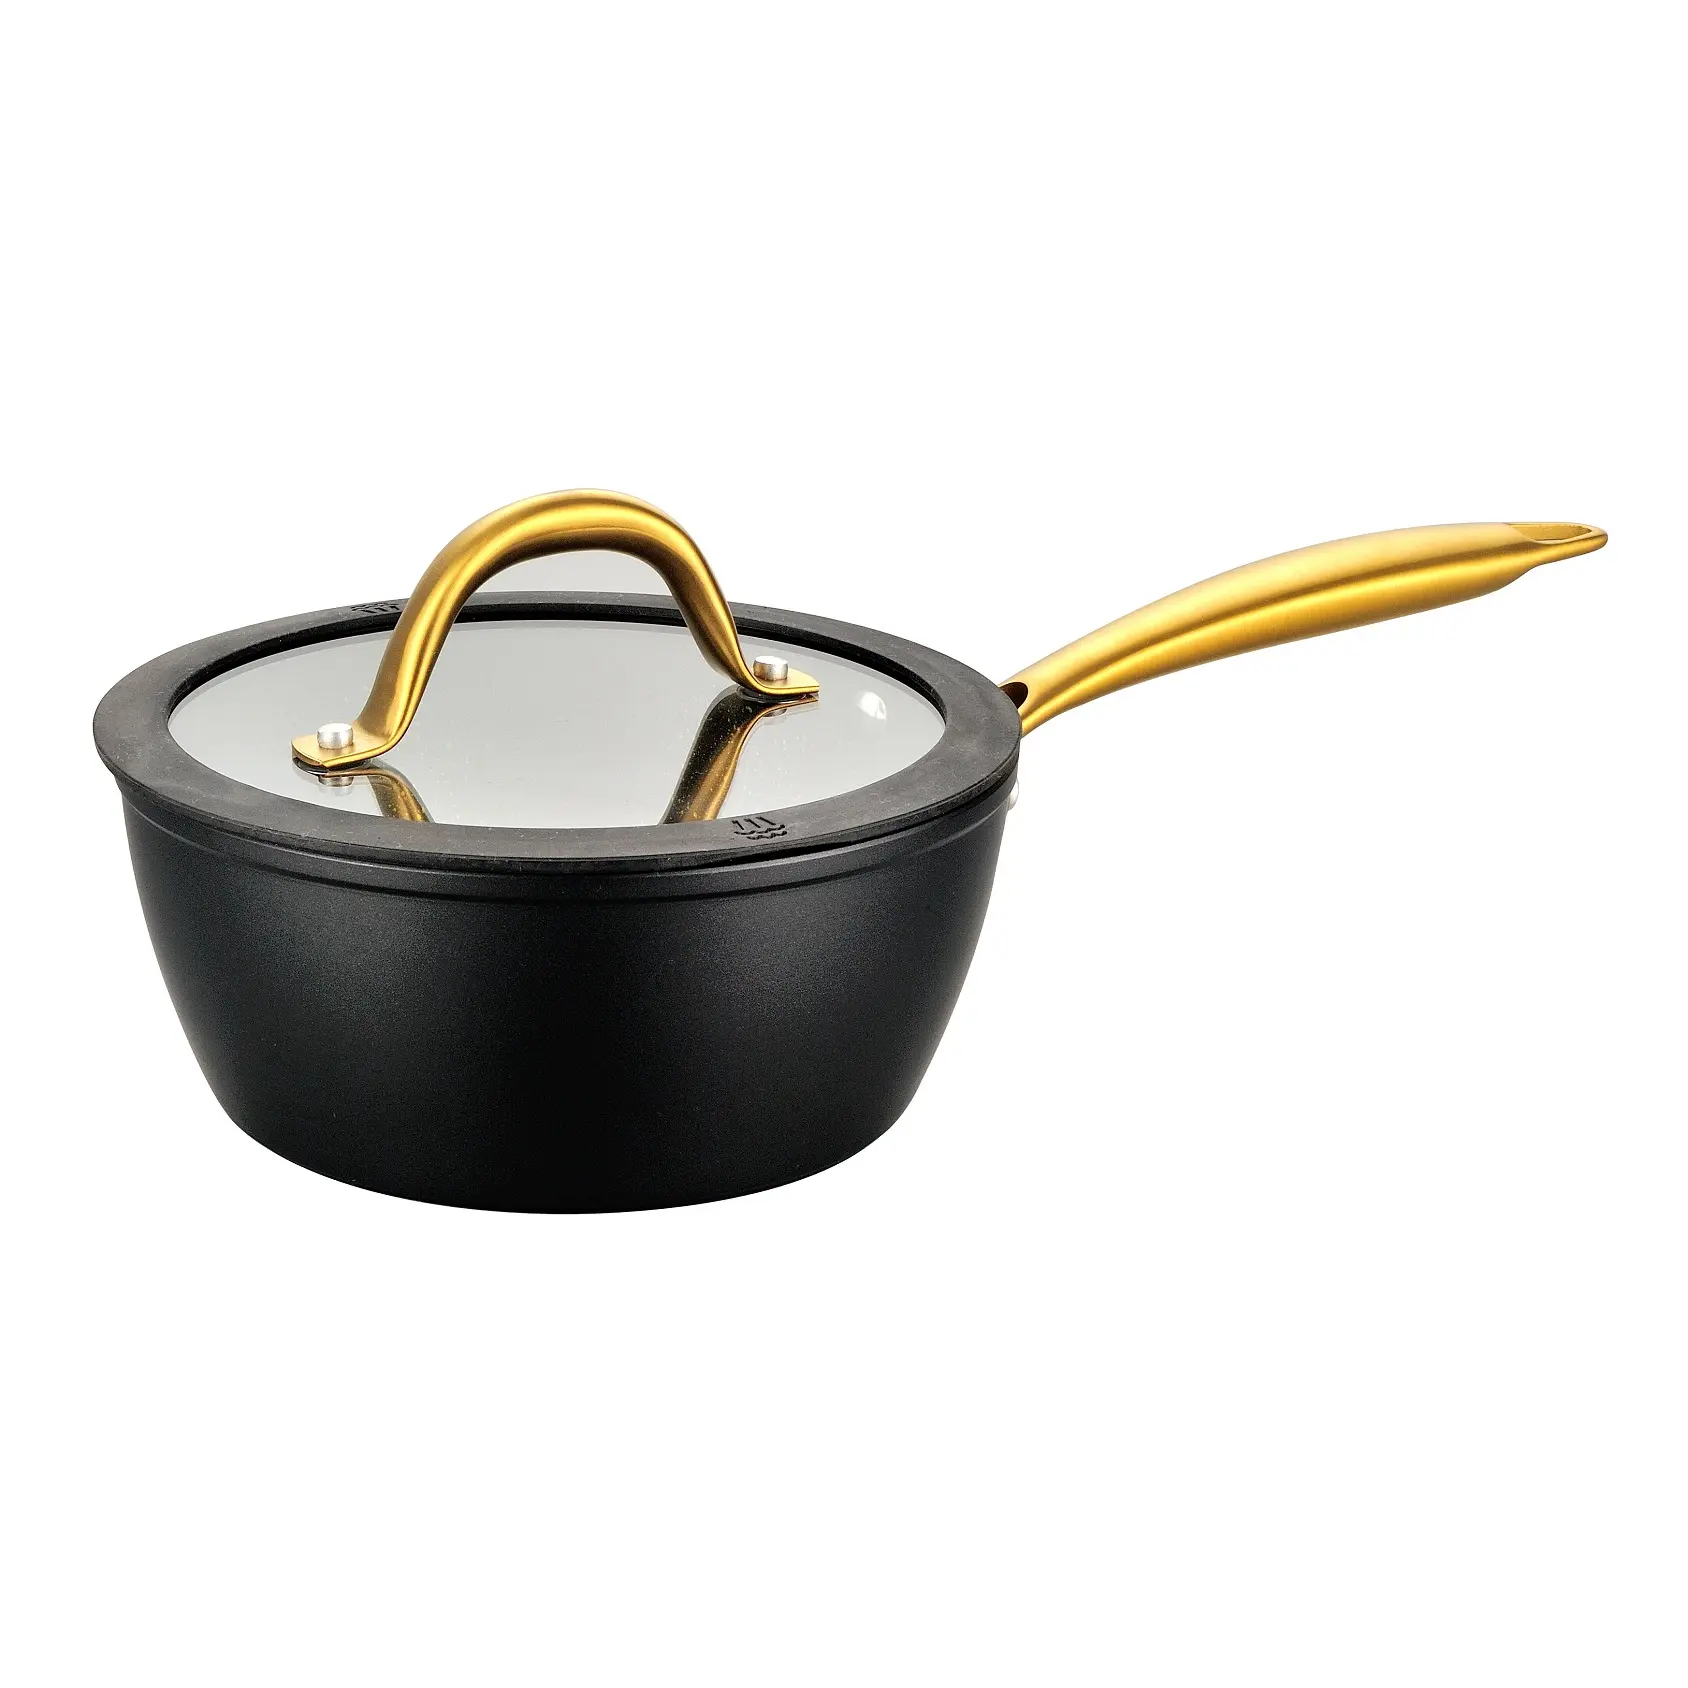 Hot Wholesale Healthy Safety Induction Forged Aluminium Cooking Fancy Non Stick Sauce Pan With Glass Lid Inside